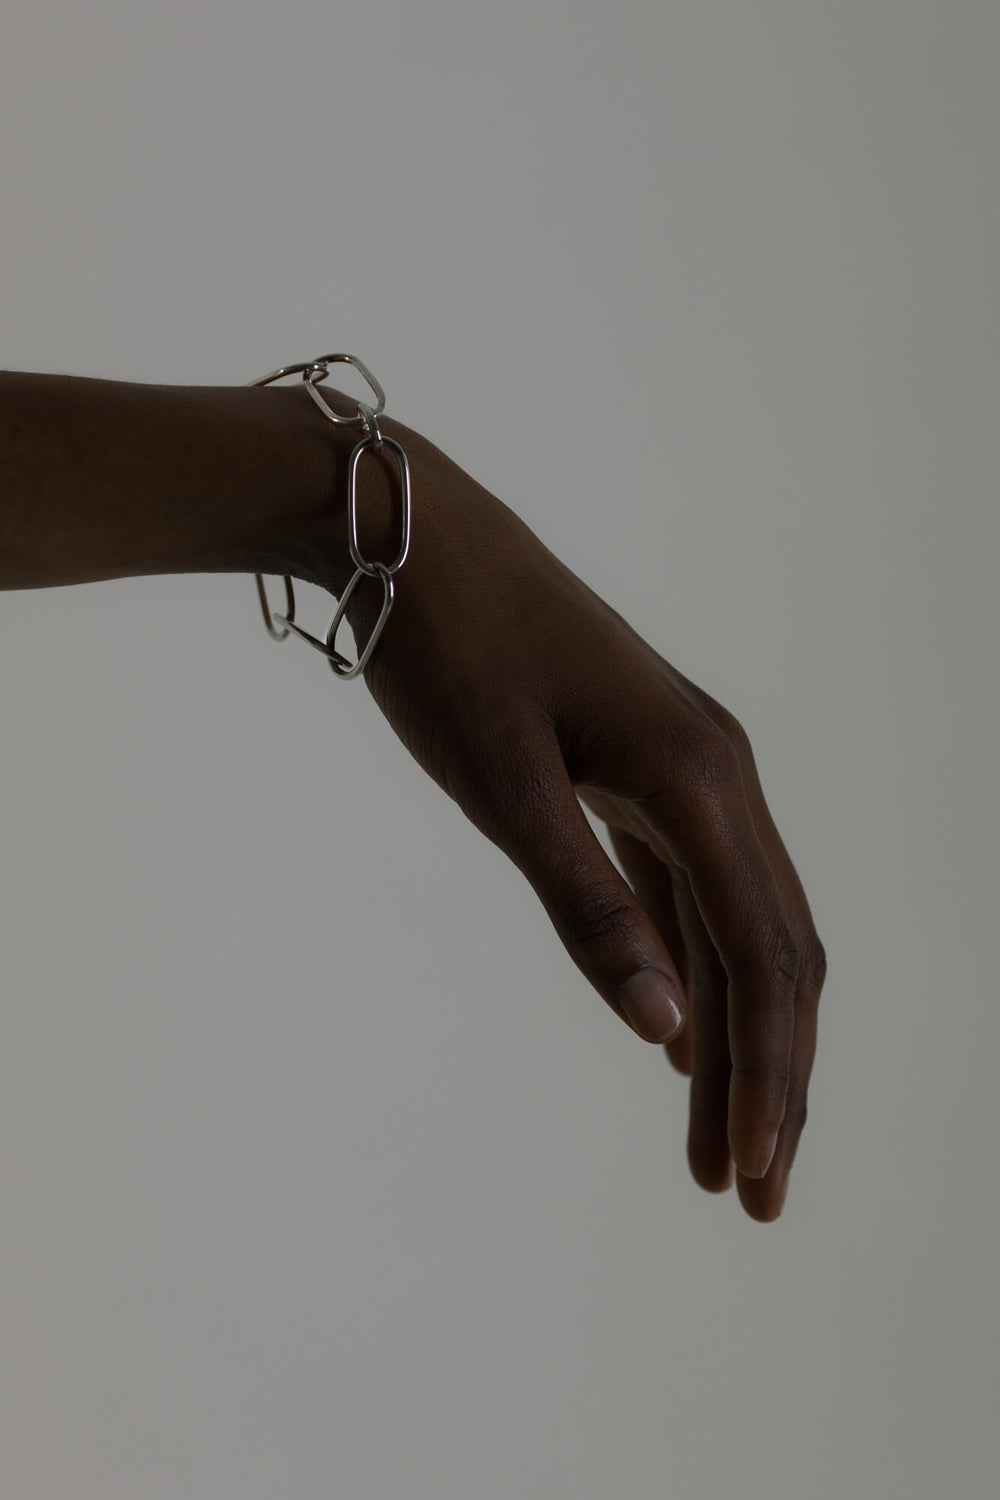 Statement bracelet made from bold link chains with a high gloss finish. Silver jewelry handmade in Berlin.